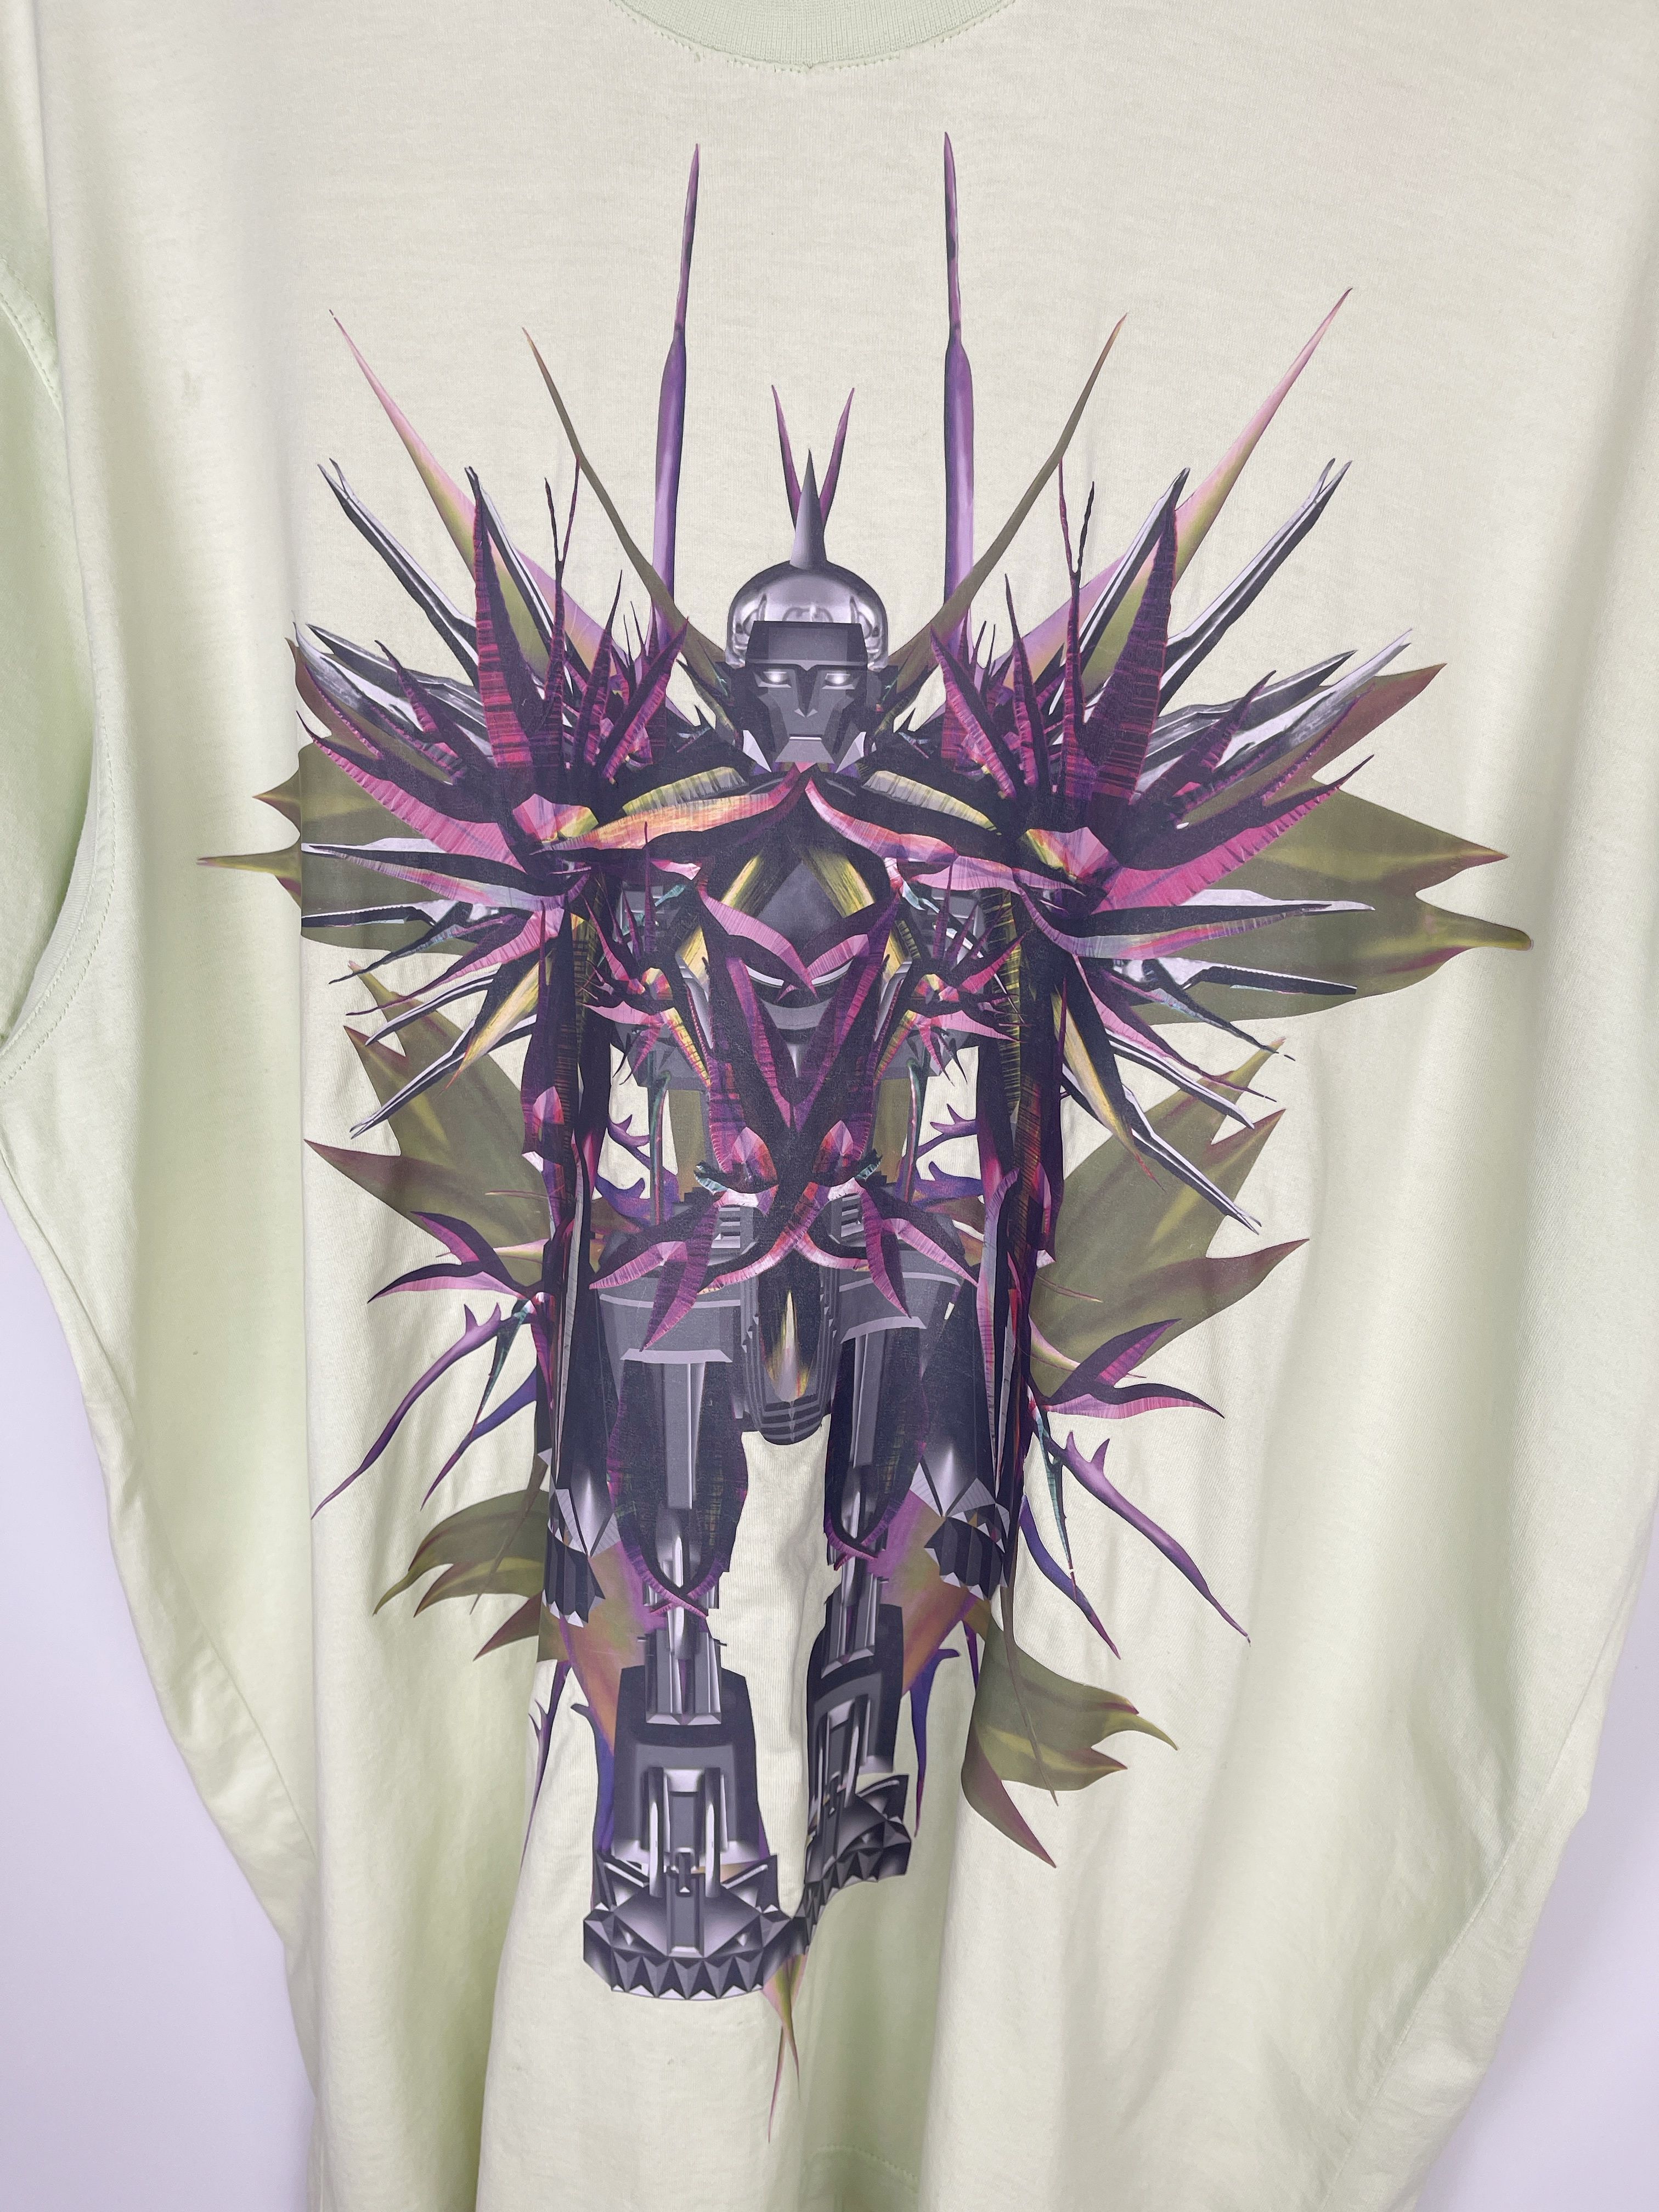 Givenchy Givenchy S/S2012 "Birds Of Paradise" Robot T-Shirt Size US M / EU 48-50 / 2 - 2 Preview